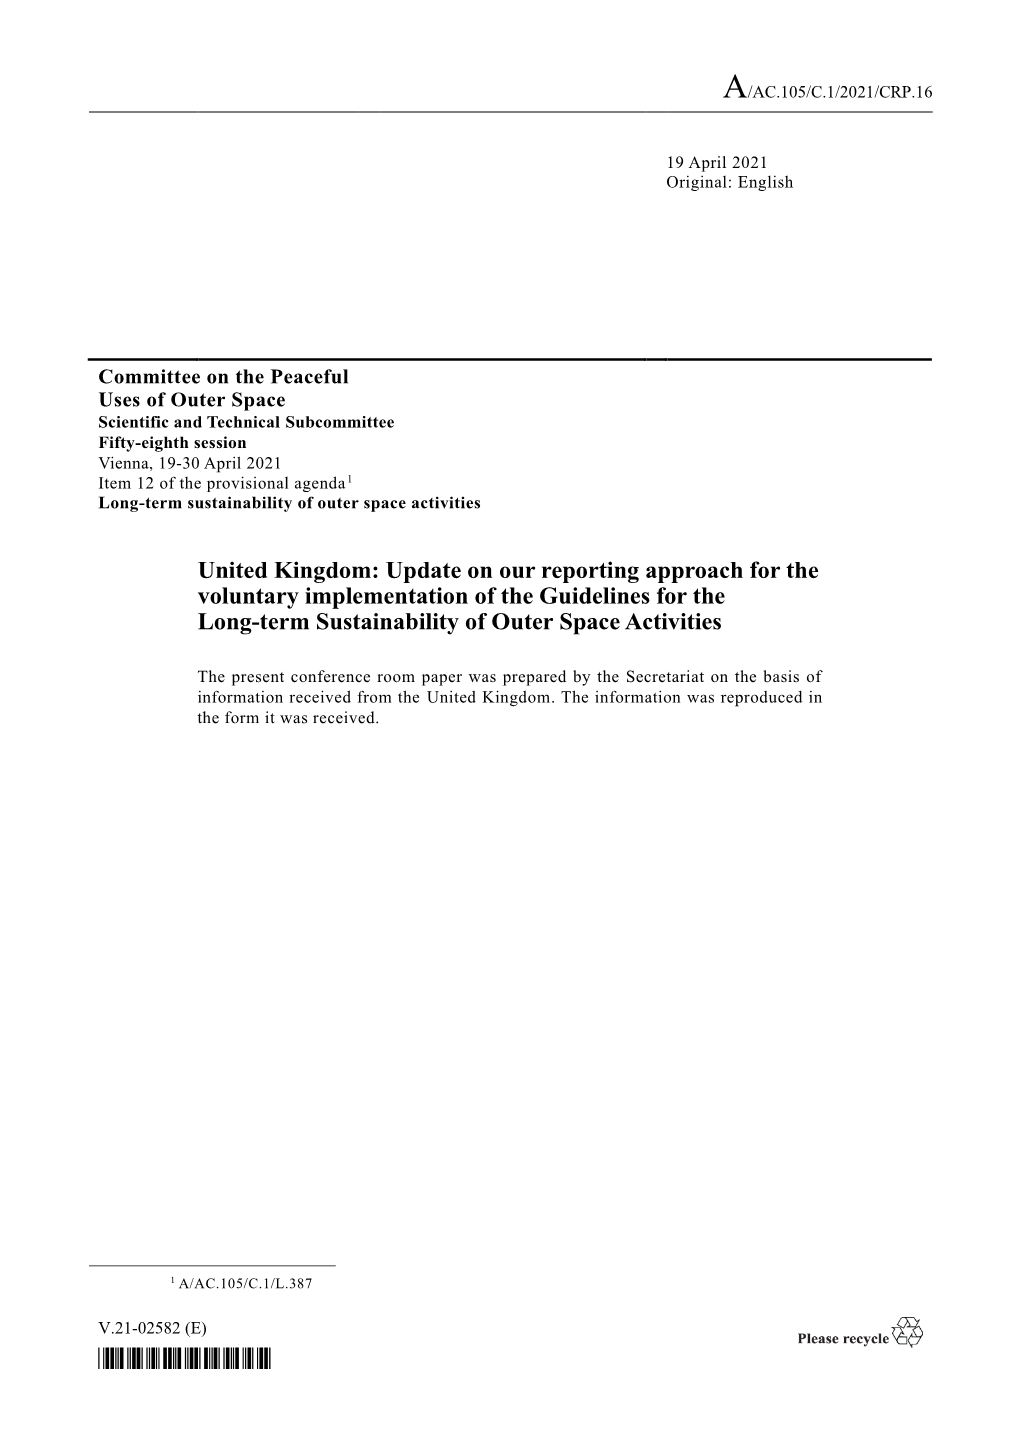 United Kingdom: Update on Our Reporting Approach for the Voluntary Implementation of the Guidelines for the Long-Term Sustainability of Outer Space Activities